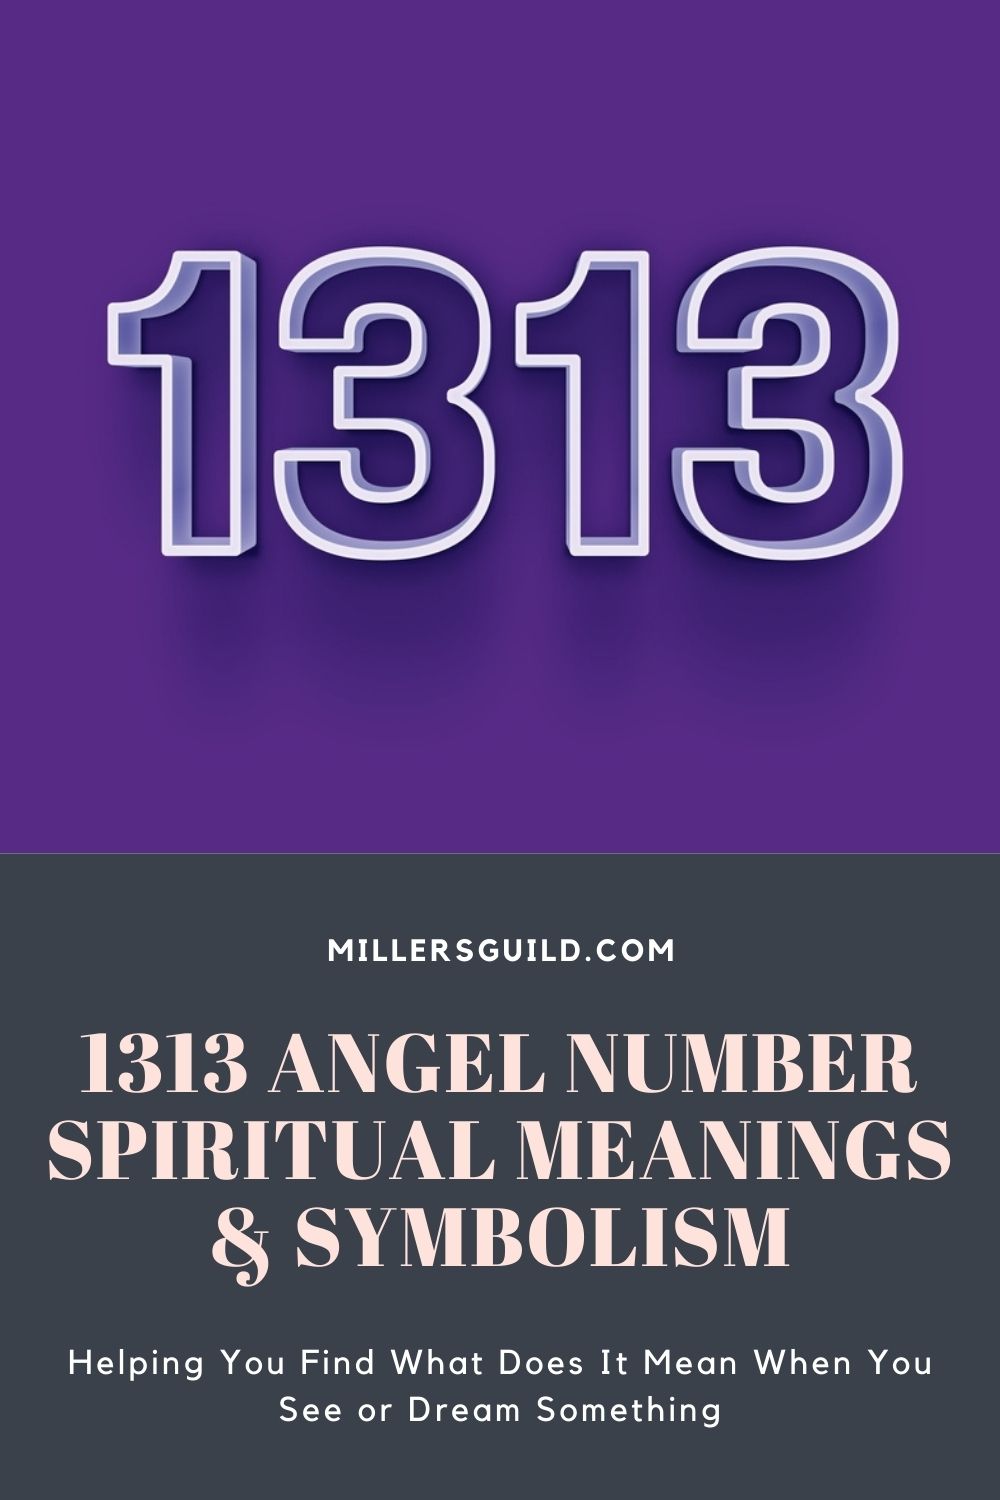 1313 Angel Number Spiritual Meanings & Symbolism 2